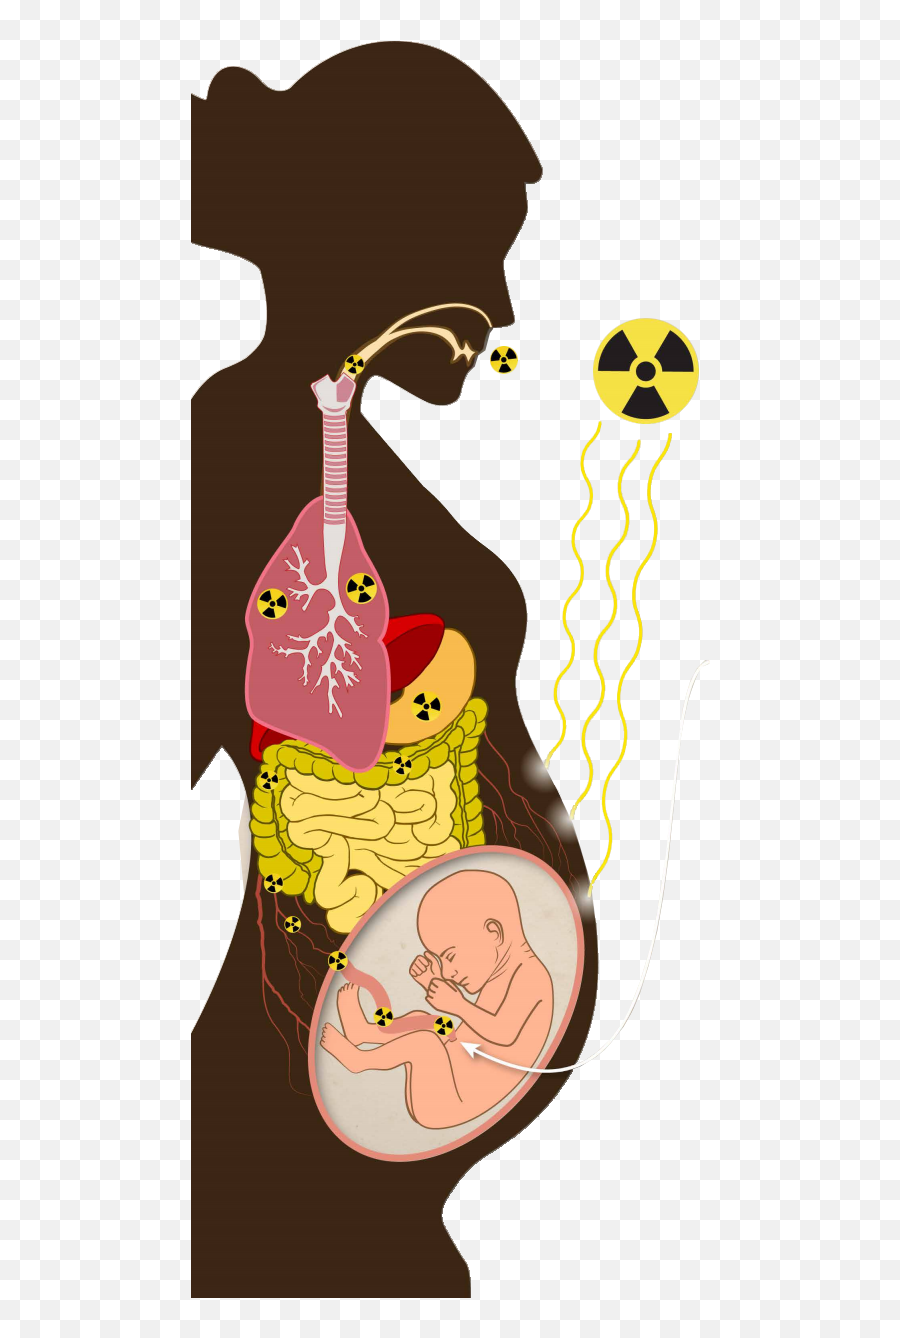 Radiation Emergencies And Pregnancy Chemicals - Radiation Pregnancy Png,Pregnancy Icon Vector